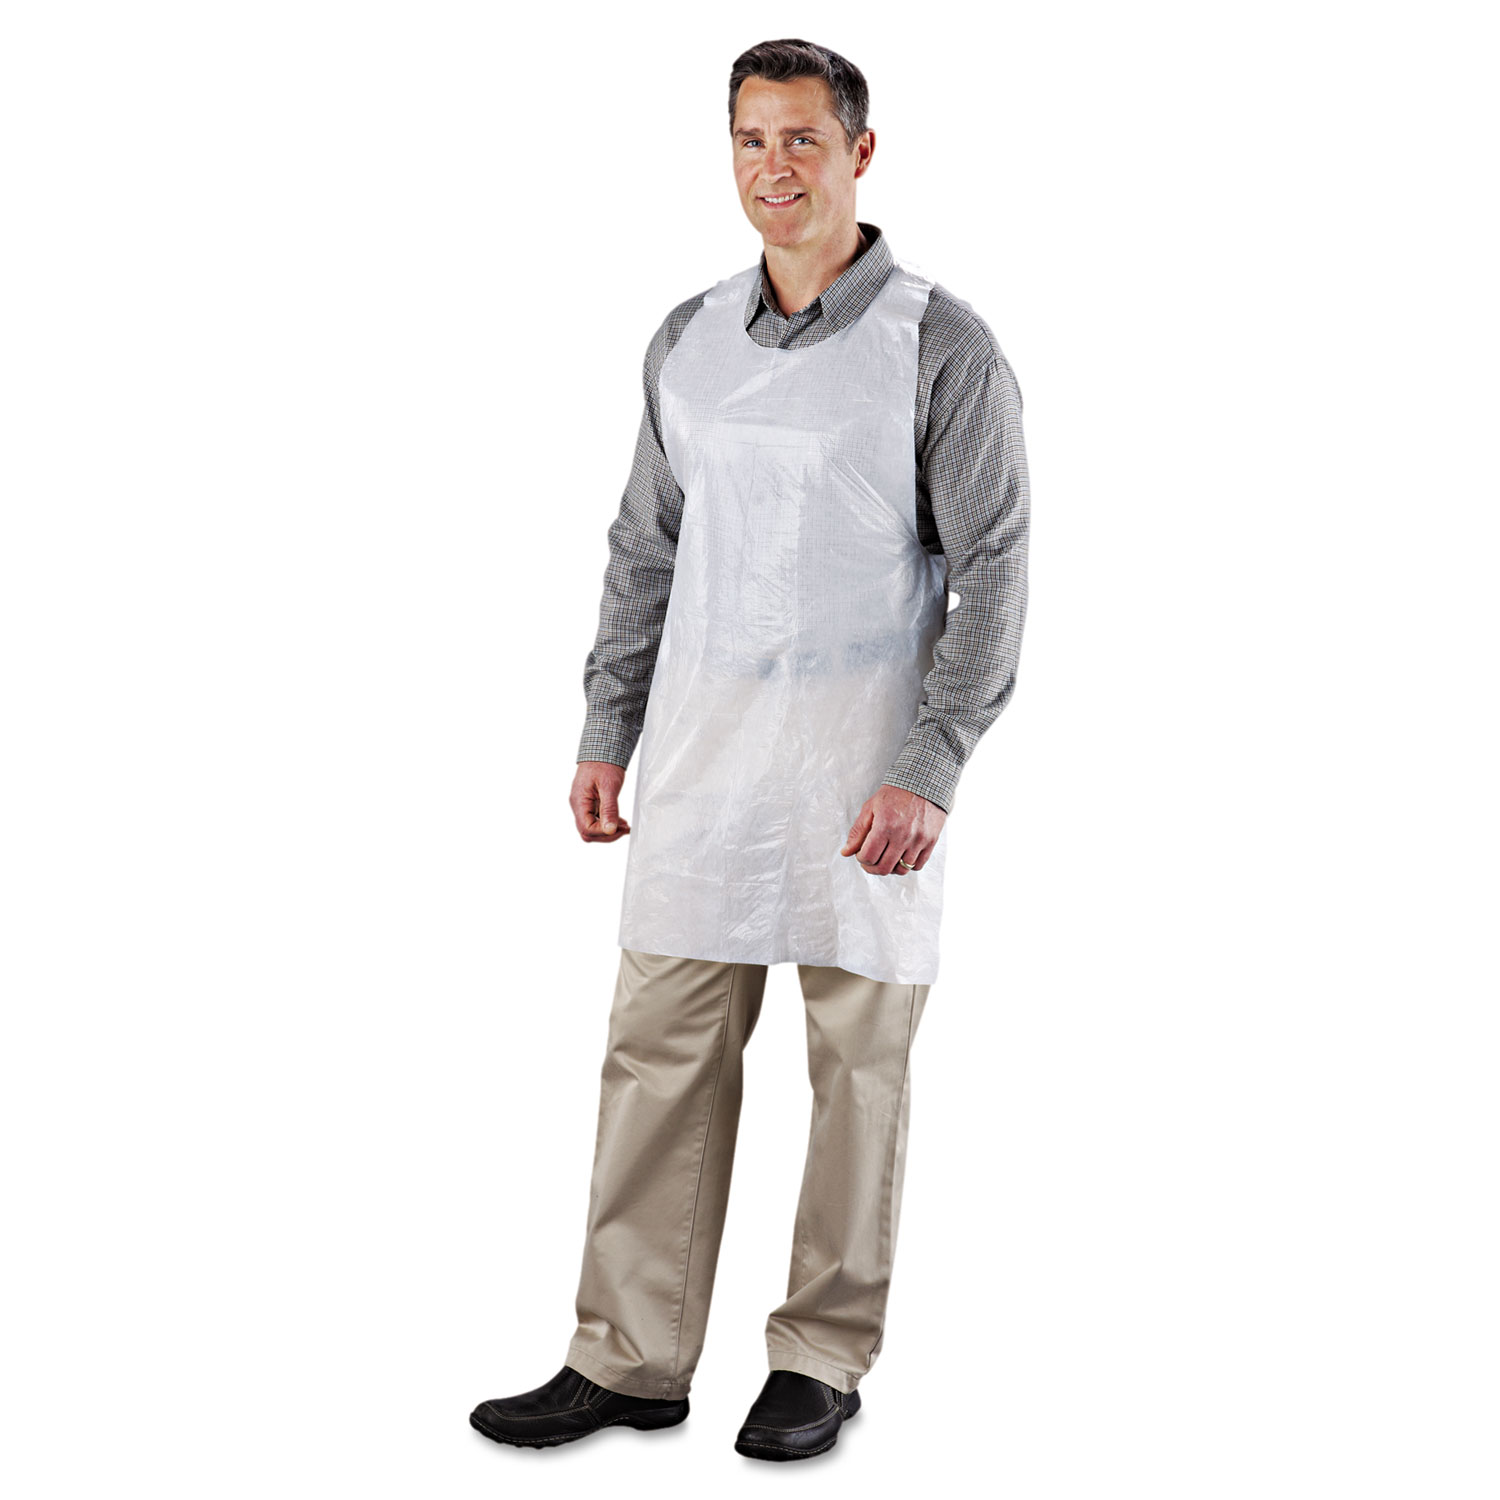  AmerCareRoyal DA2442 Poly Apron, White, 24 in. W x 42 in. L, One Size Fits All, 1000/Carton (RPPDA2442) 